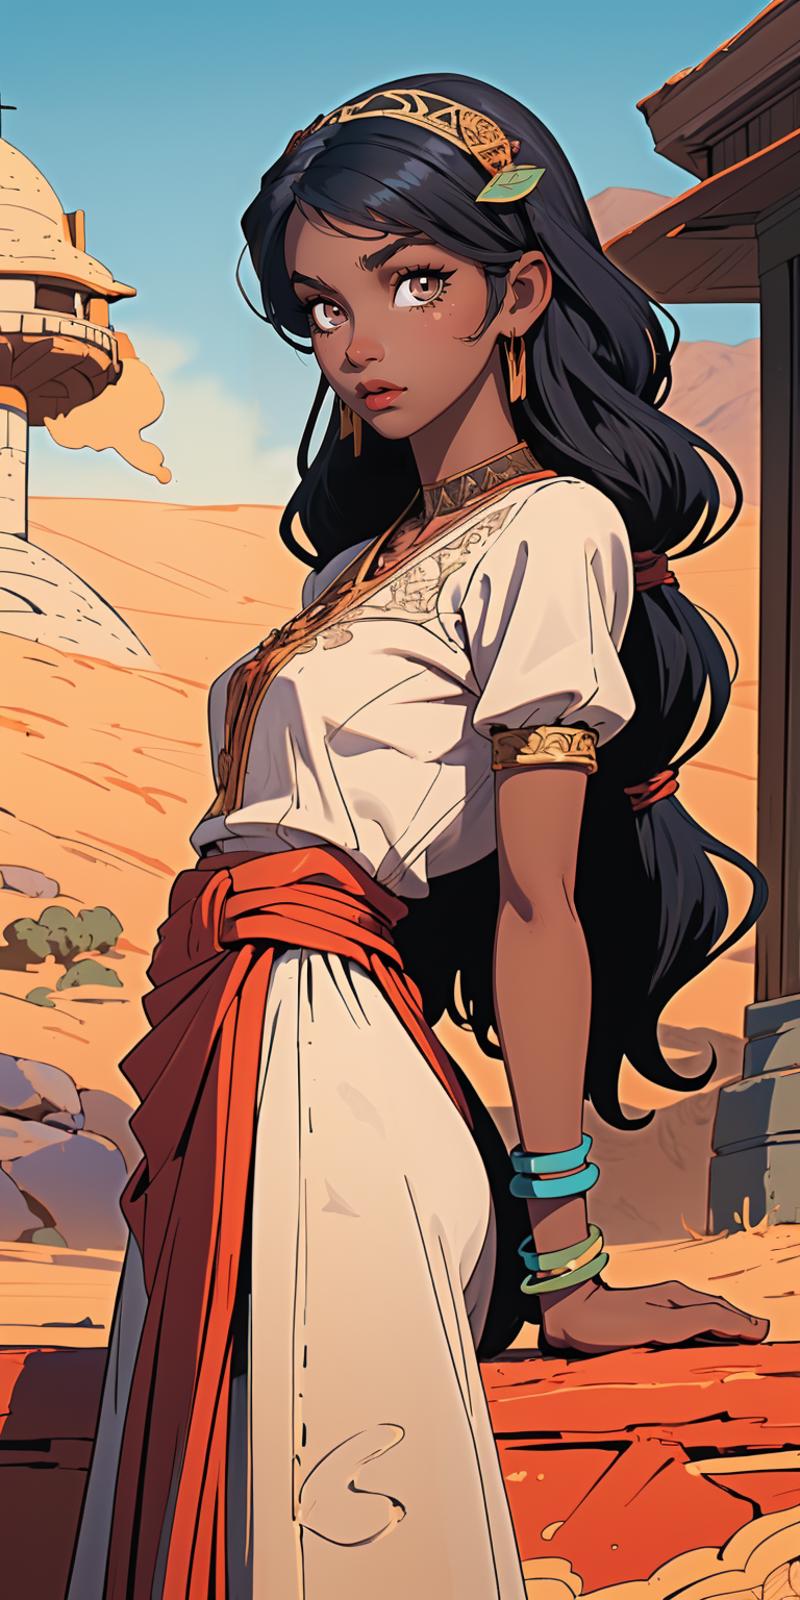 A woman wearing a white dress with a red belt and gold accents, standing in a desert setting.